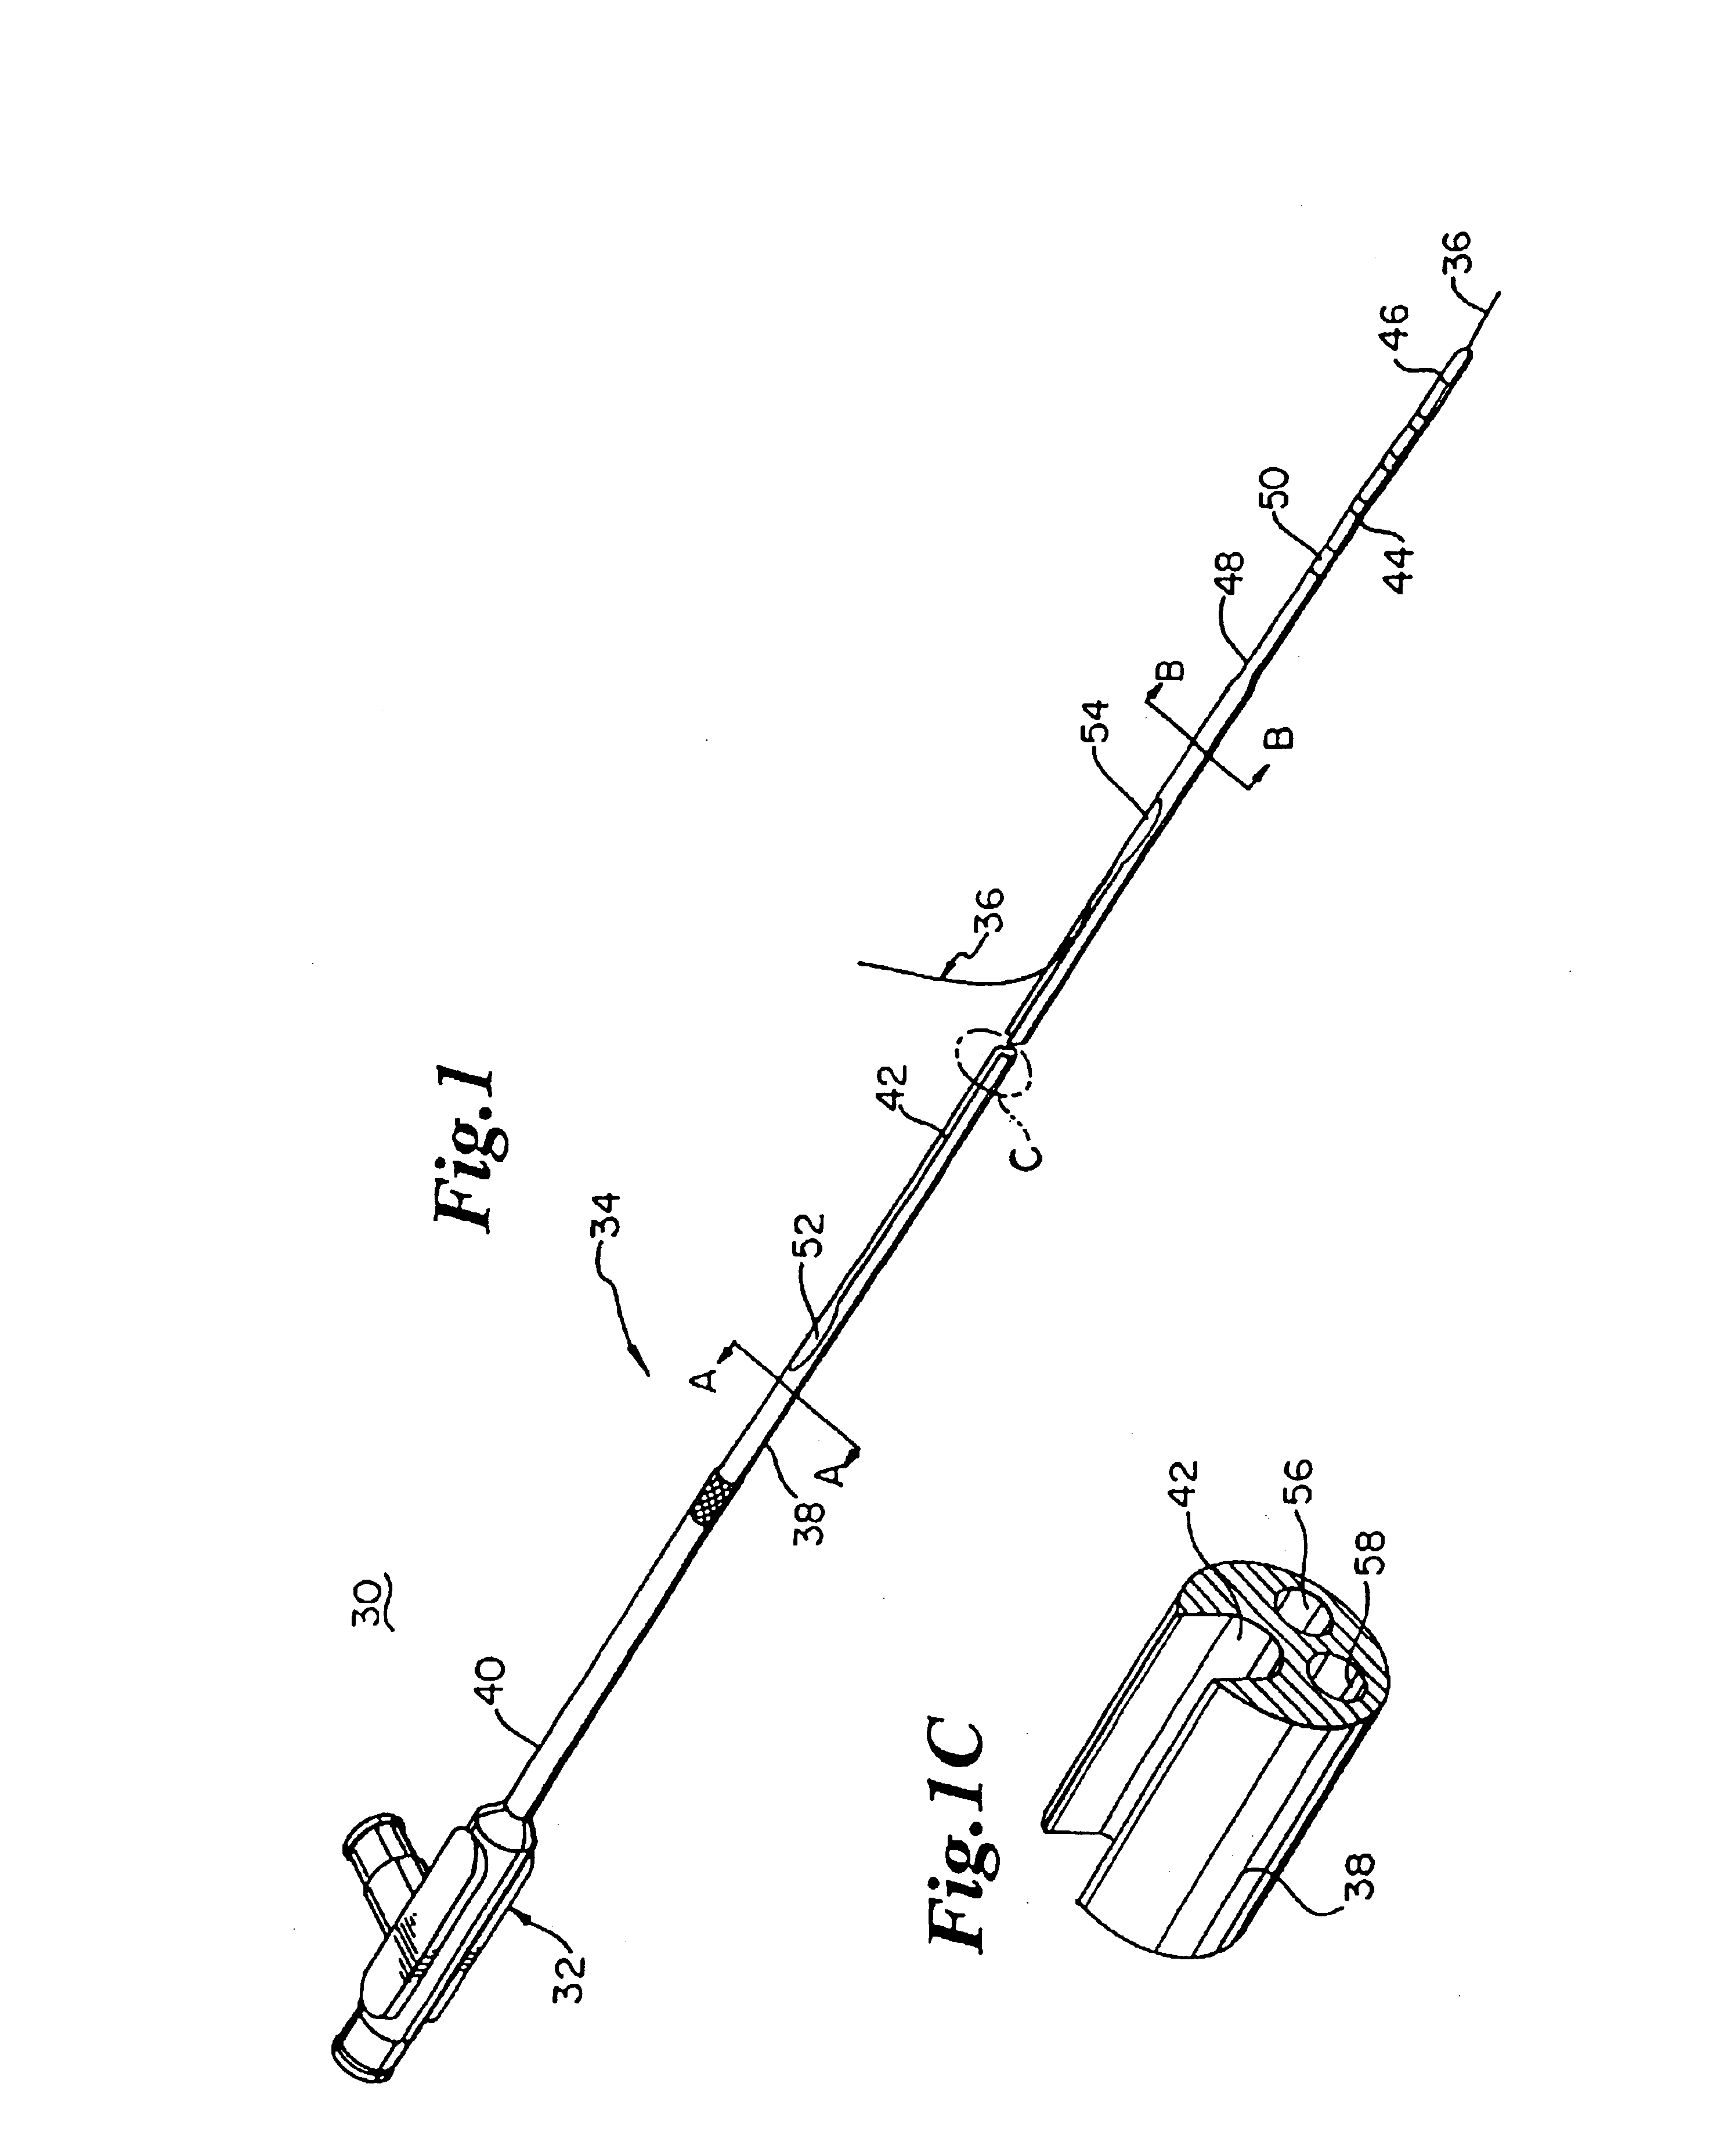 Guide wire insertion and re-insertion tools and methods of use